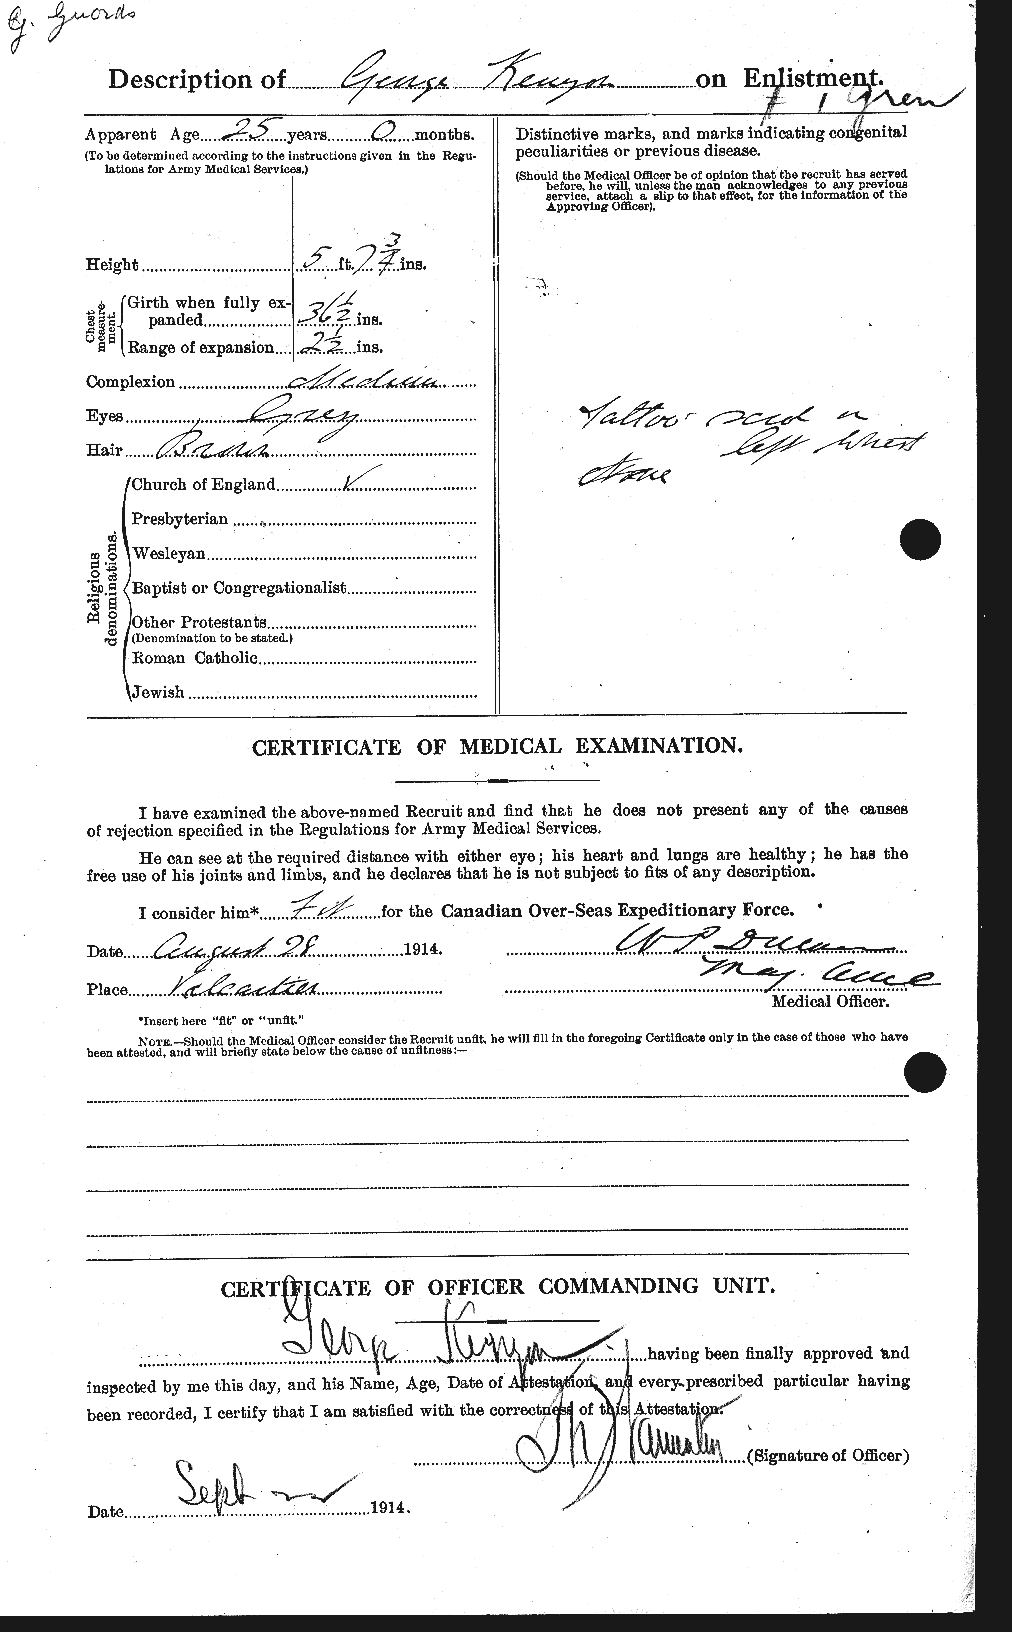 Personnel Records of the First World War - CEF 430450b